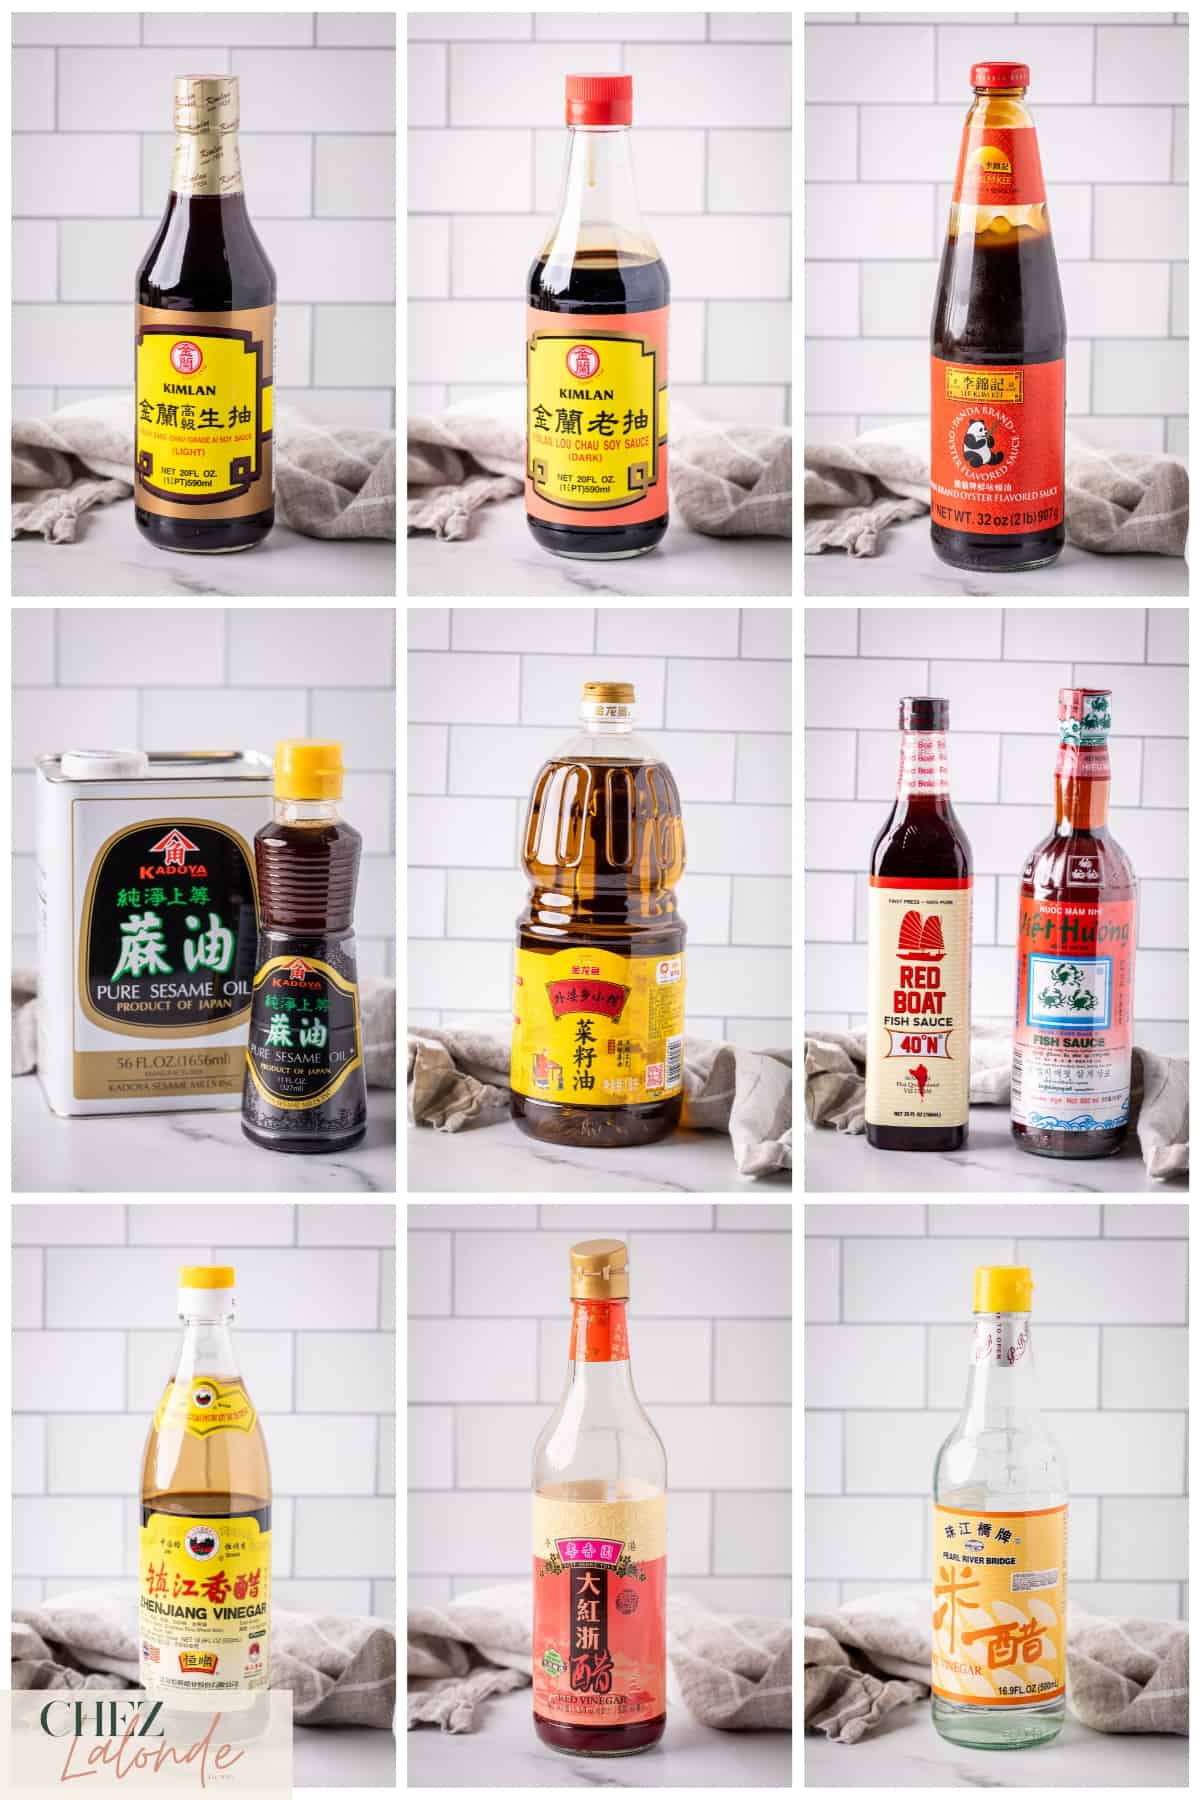 A group of 9 different Chinese condiments and sauces that were showcasing in this post. 